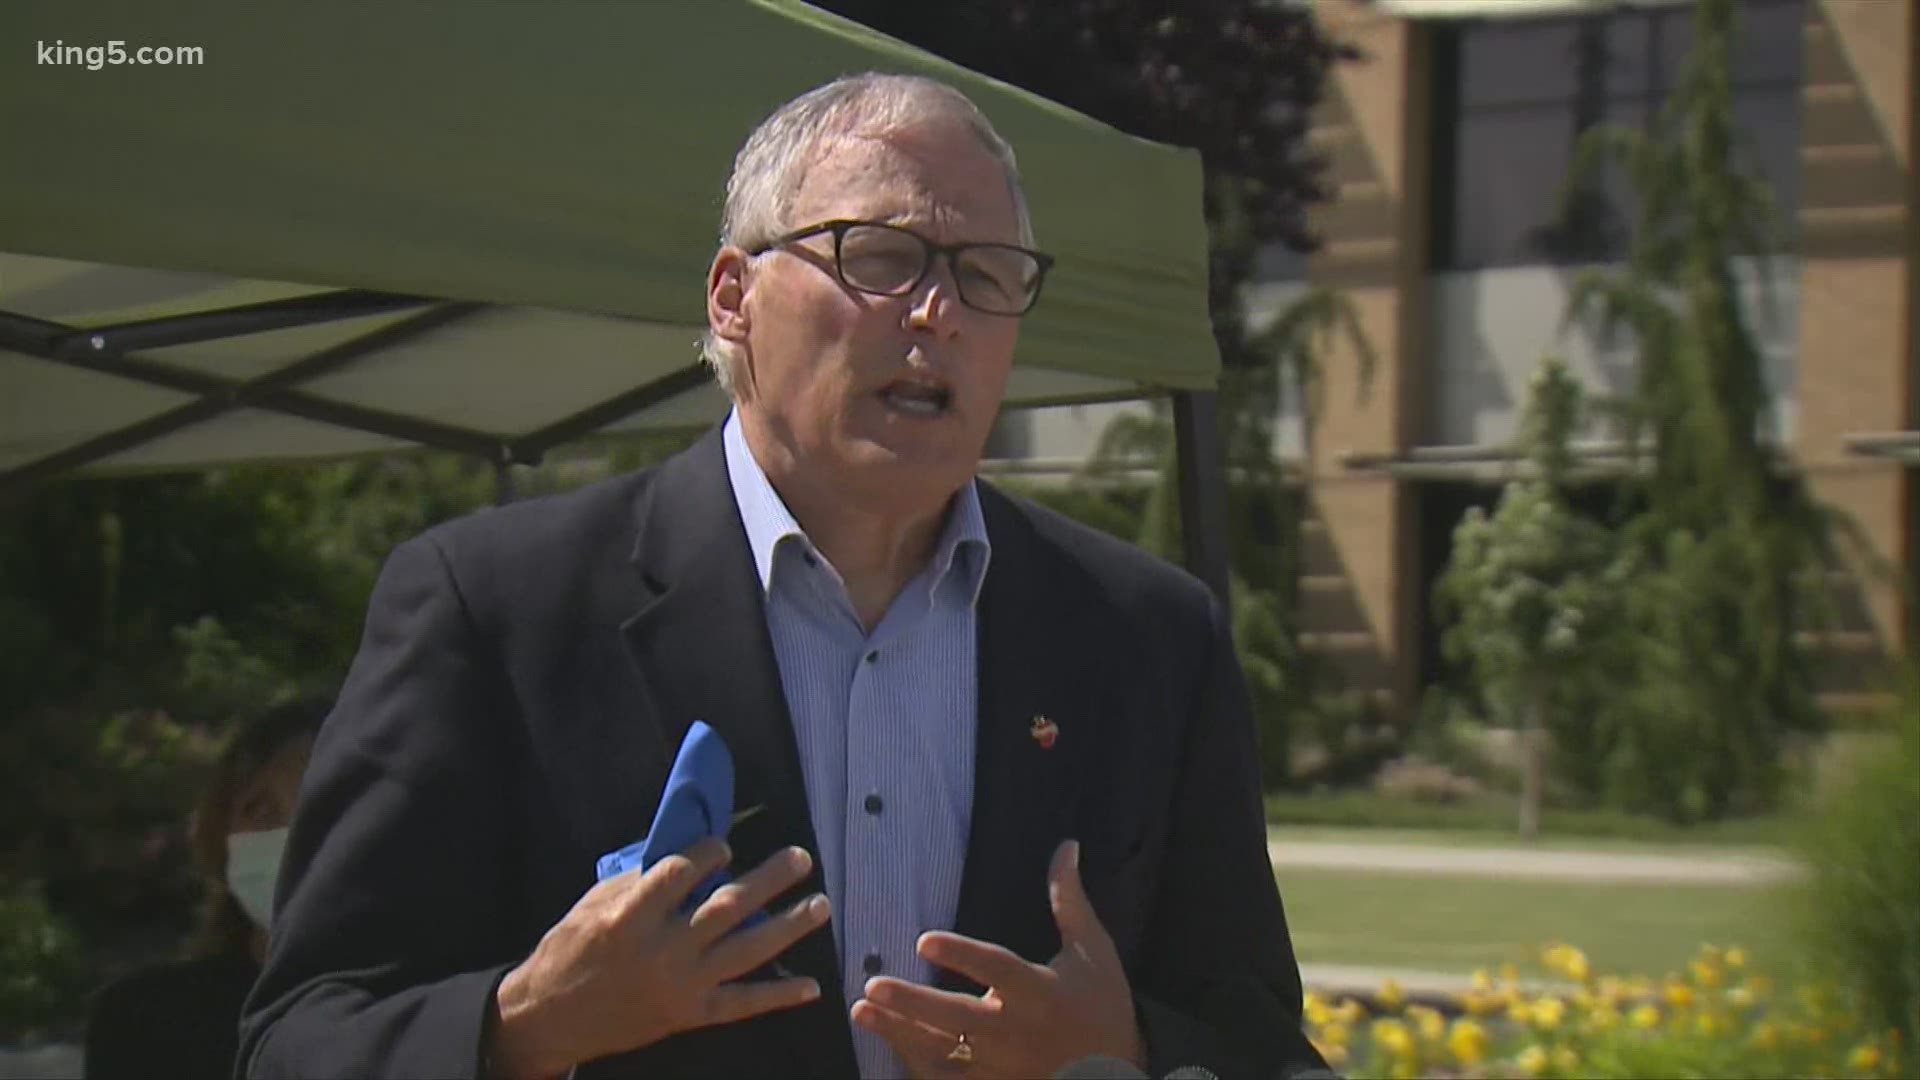 Washington Gov. Inslee said Yakima Valley is seeing a rise in COVID-19 cases and the region needs more testing and contract tracing.